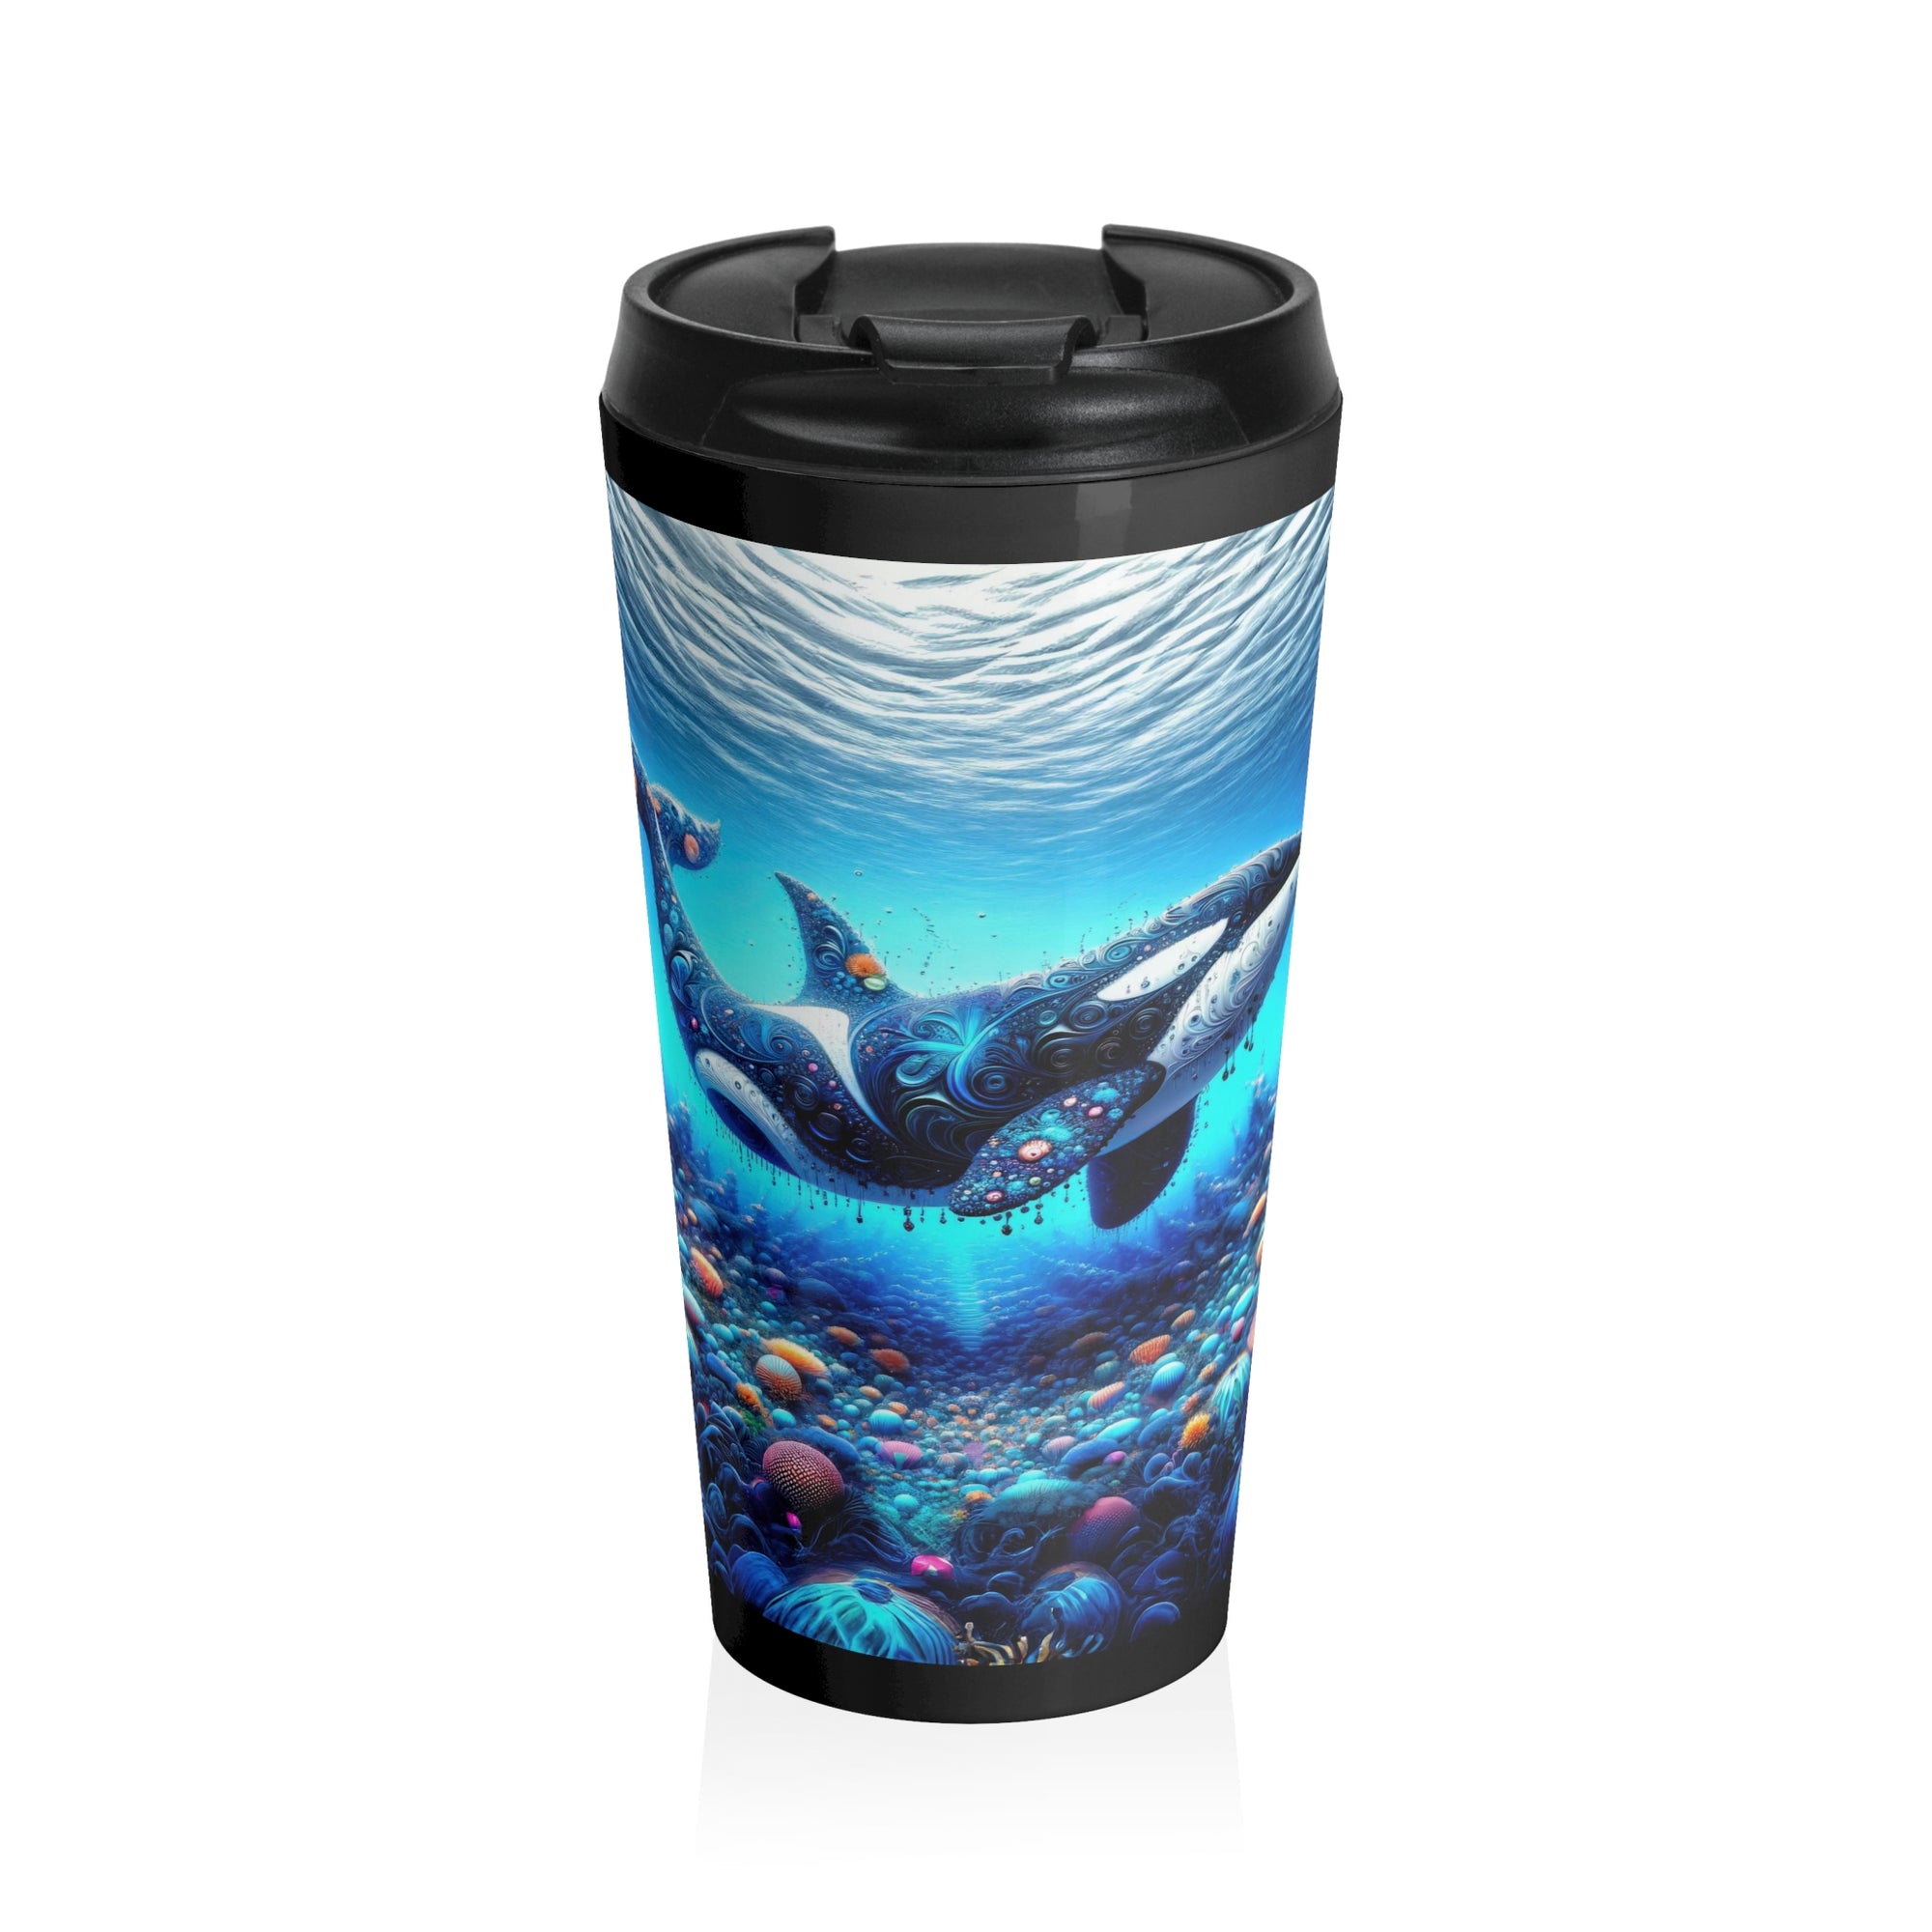 Whispers of the Whorled Waters Travel Mug